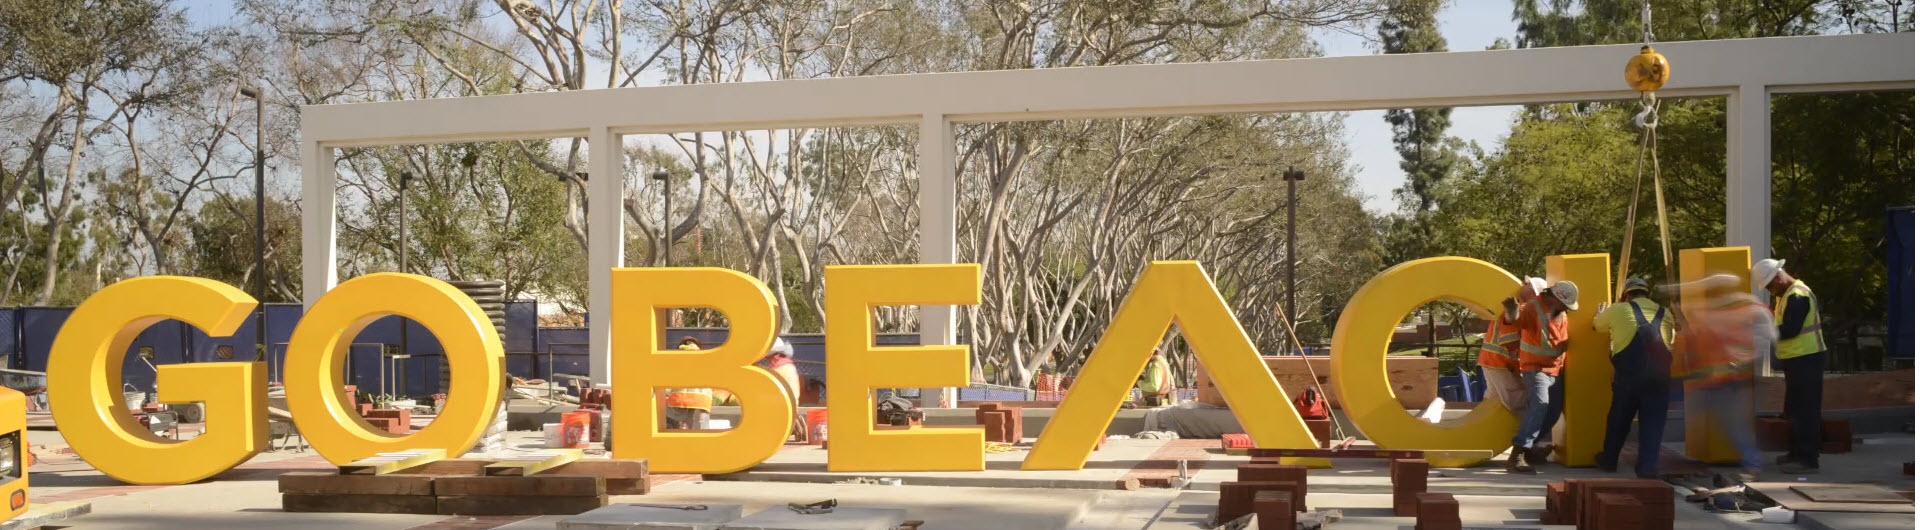 Construction of Go Beach lettering on Campus